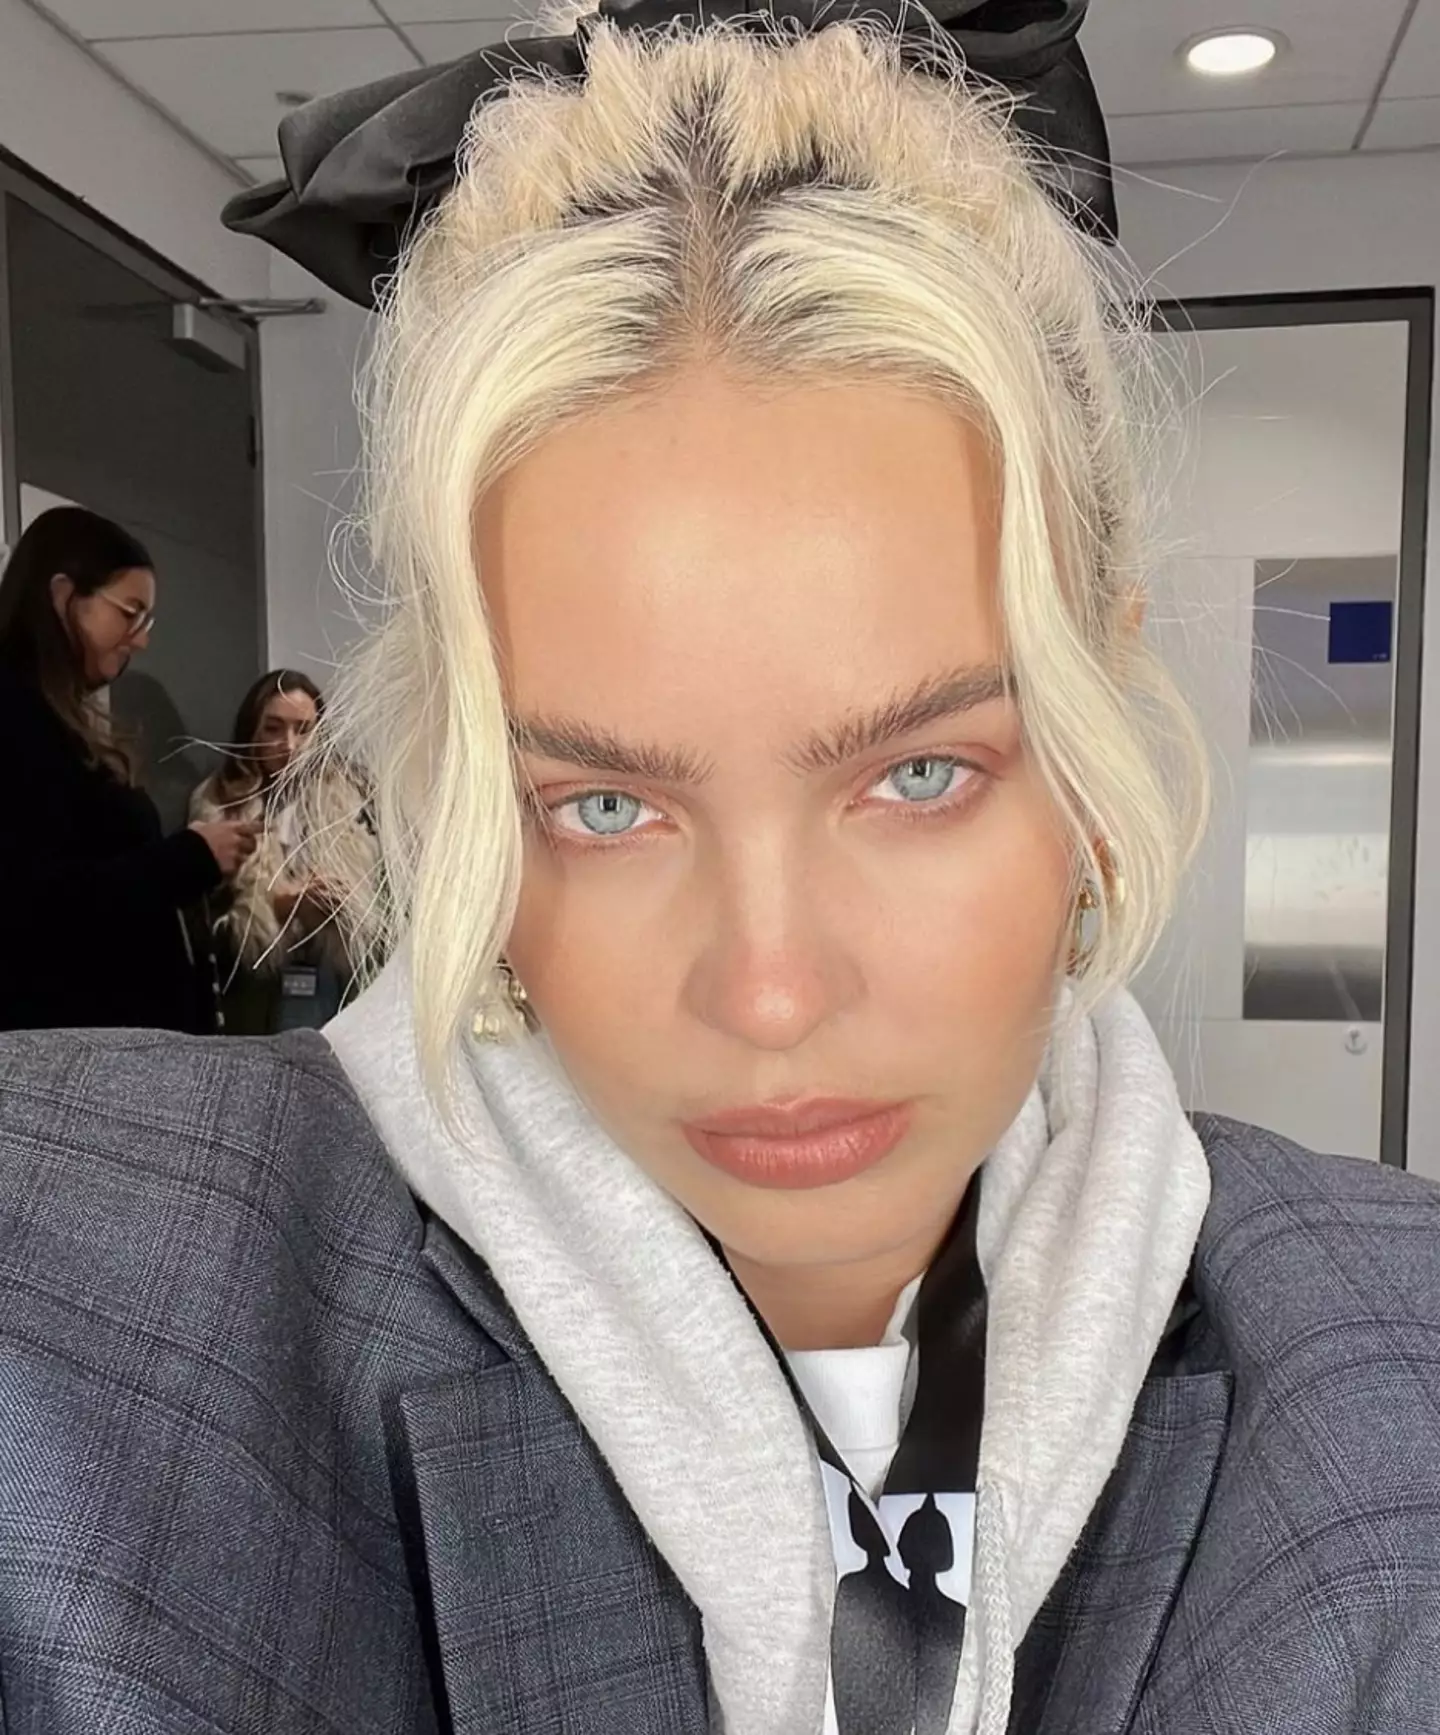 Fans congratulated Anne-Marie for carrying on with her performance (